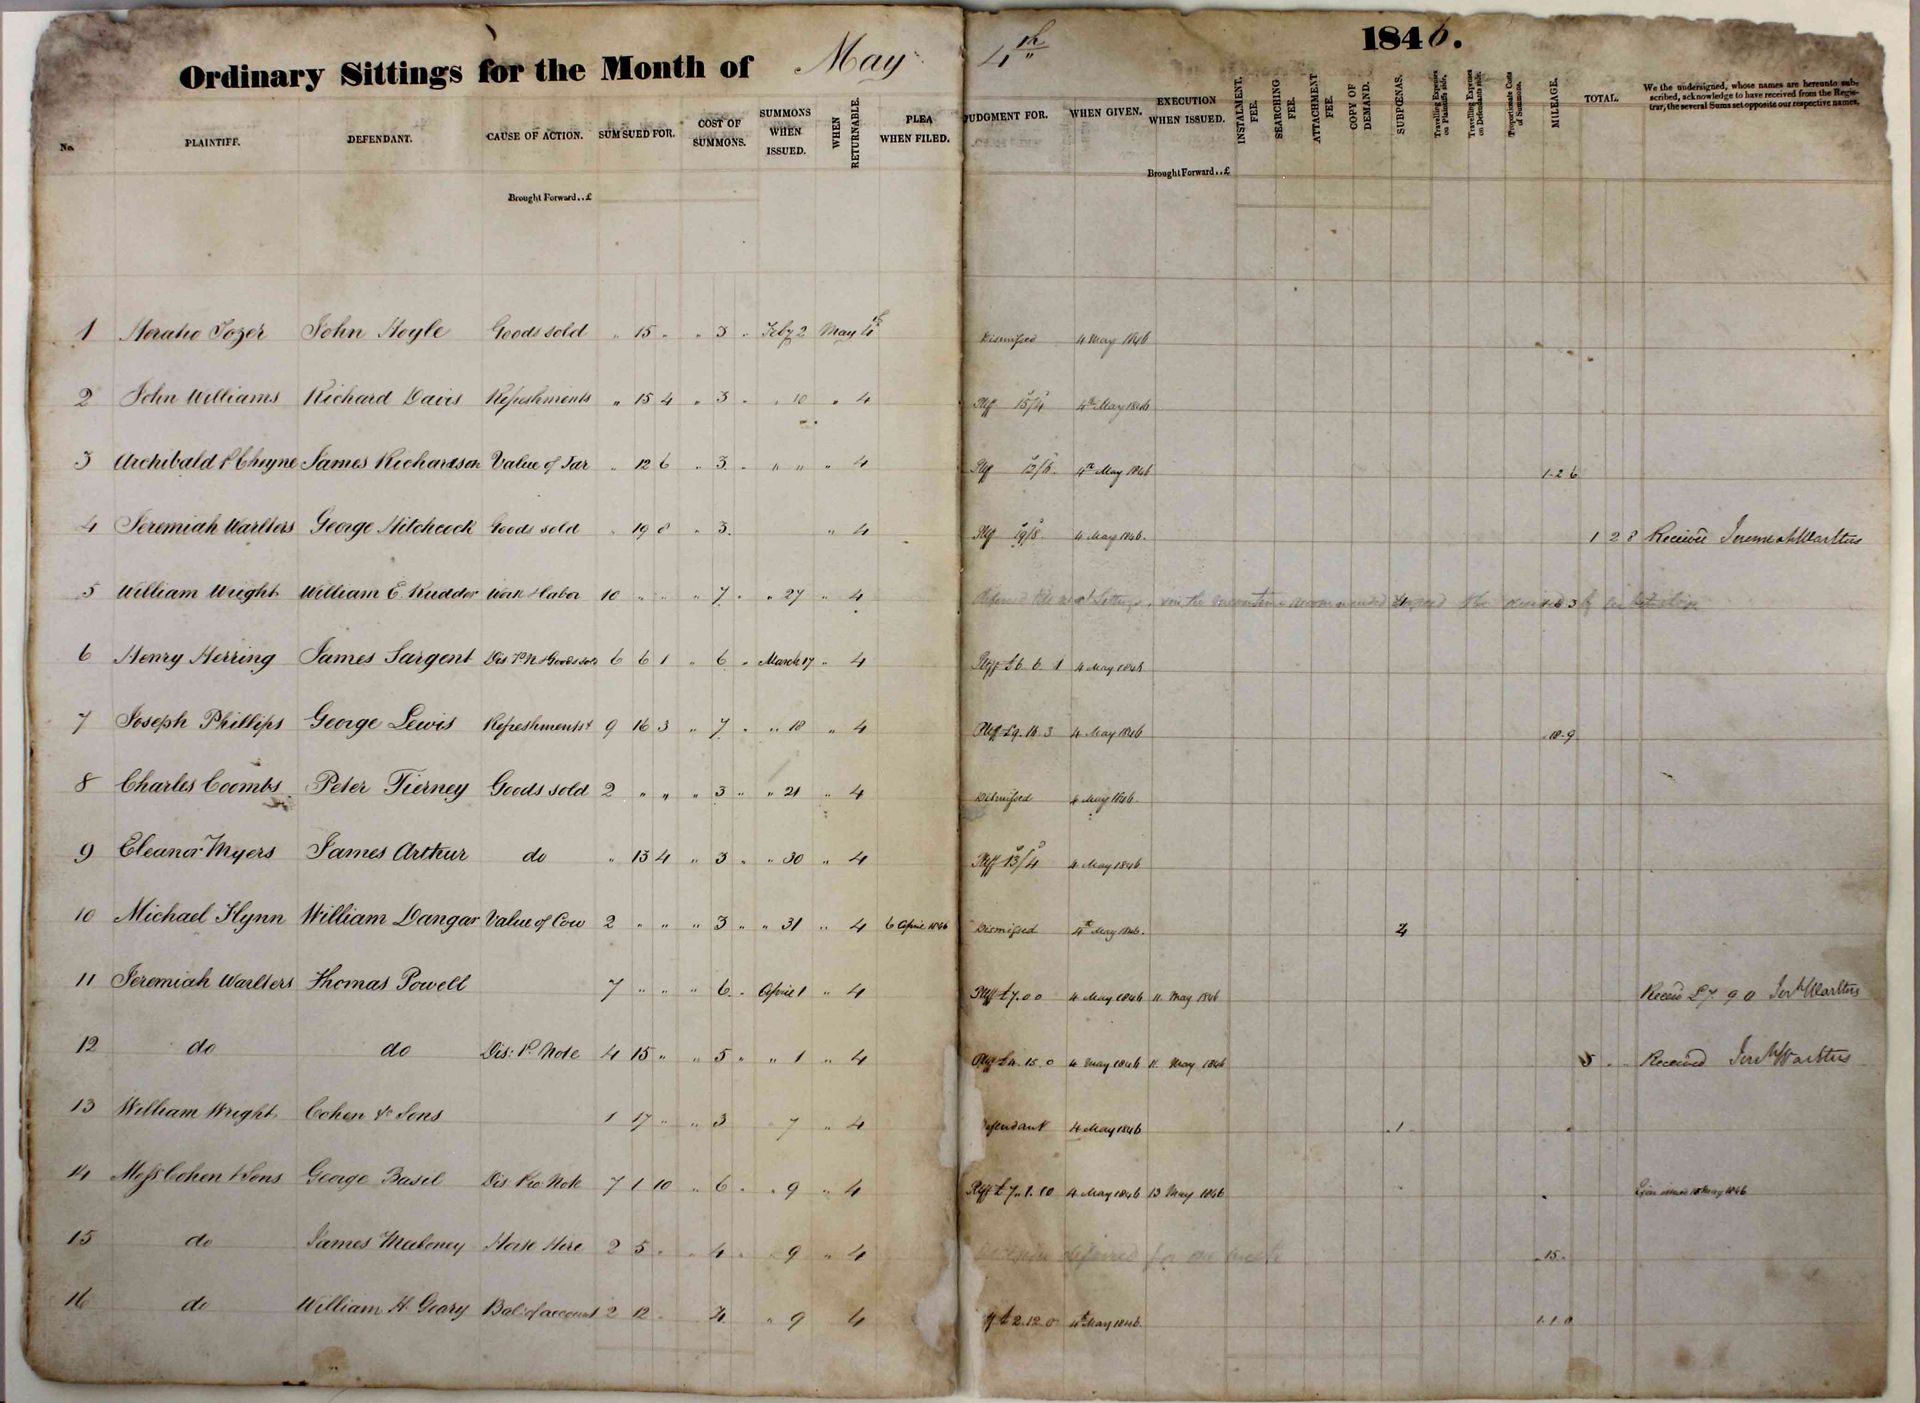 Sample from the Small Debts Register - Port Macquarie, 4 May 1846